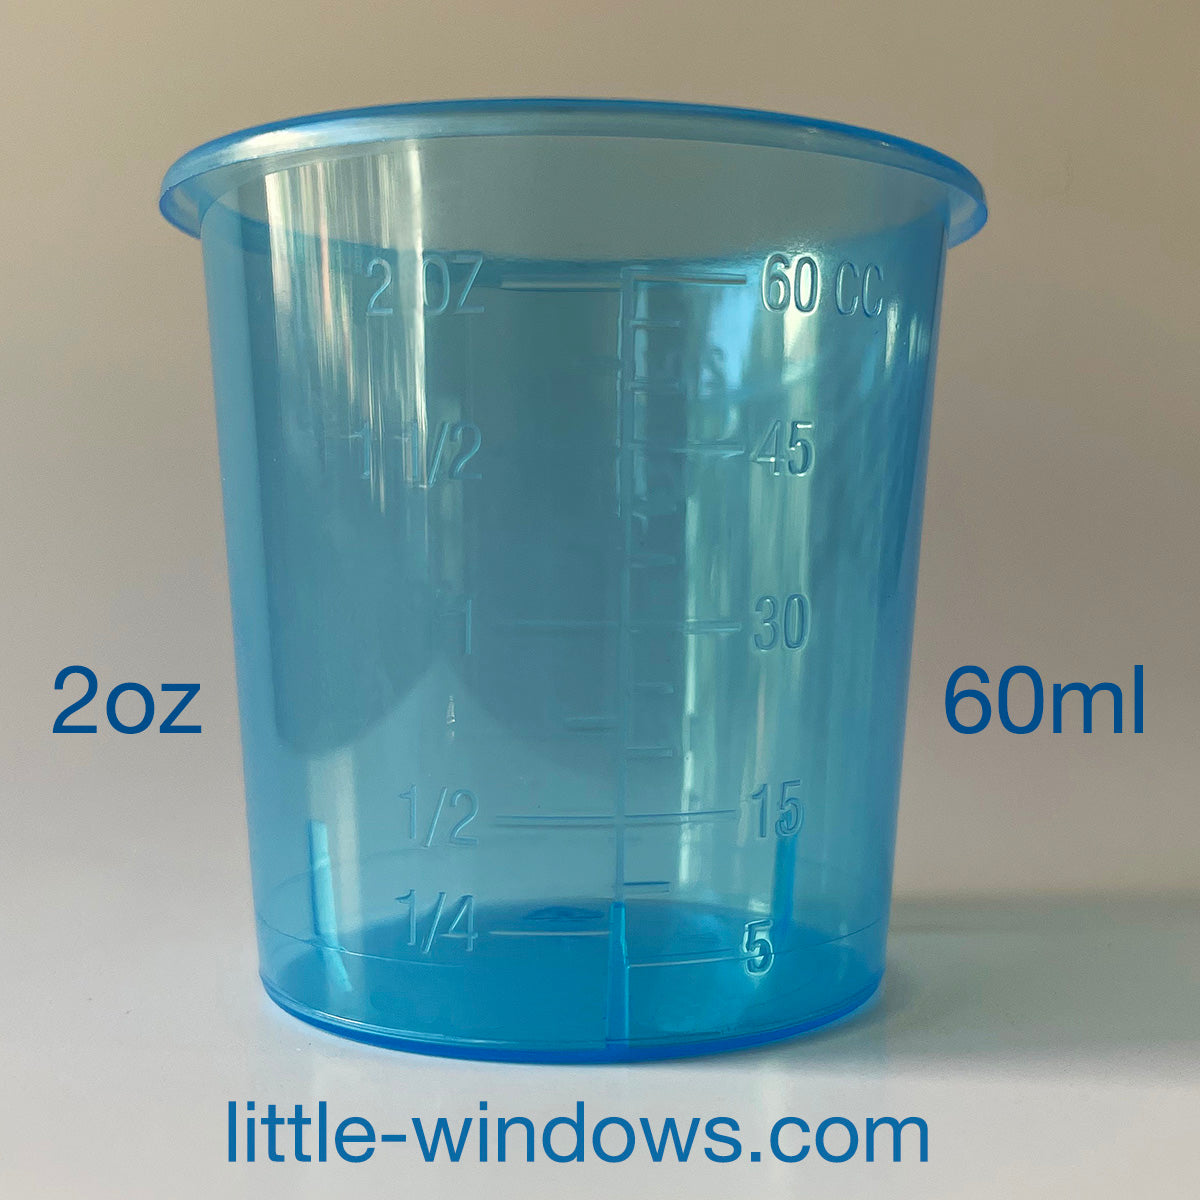 resin supplies measuring cup